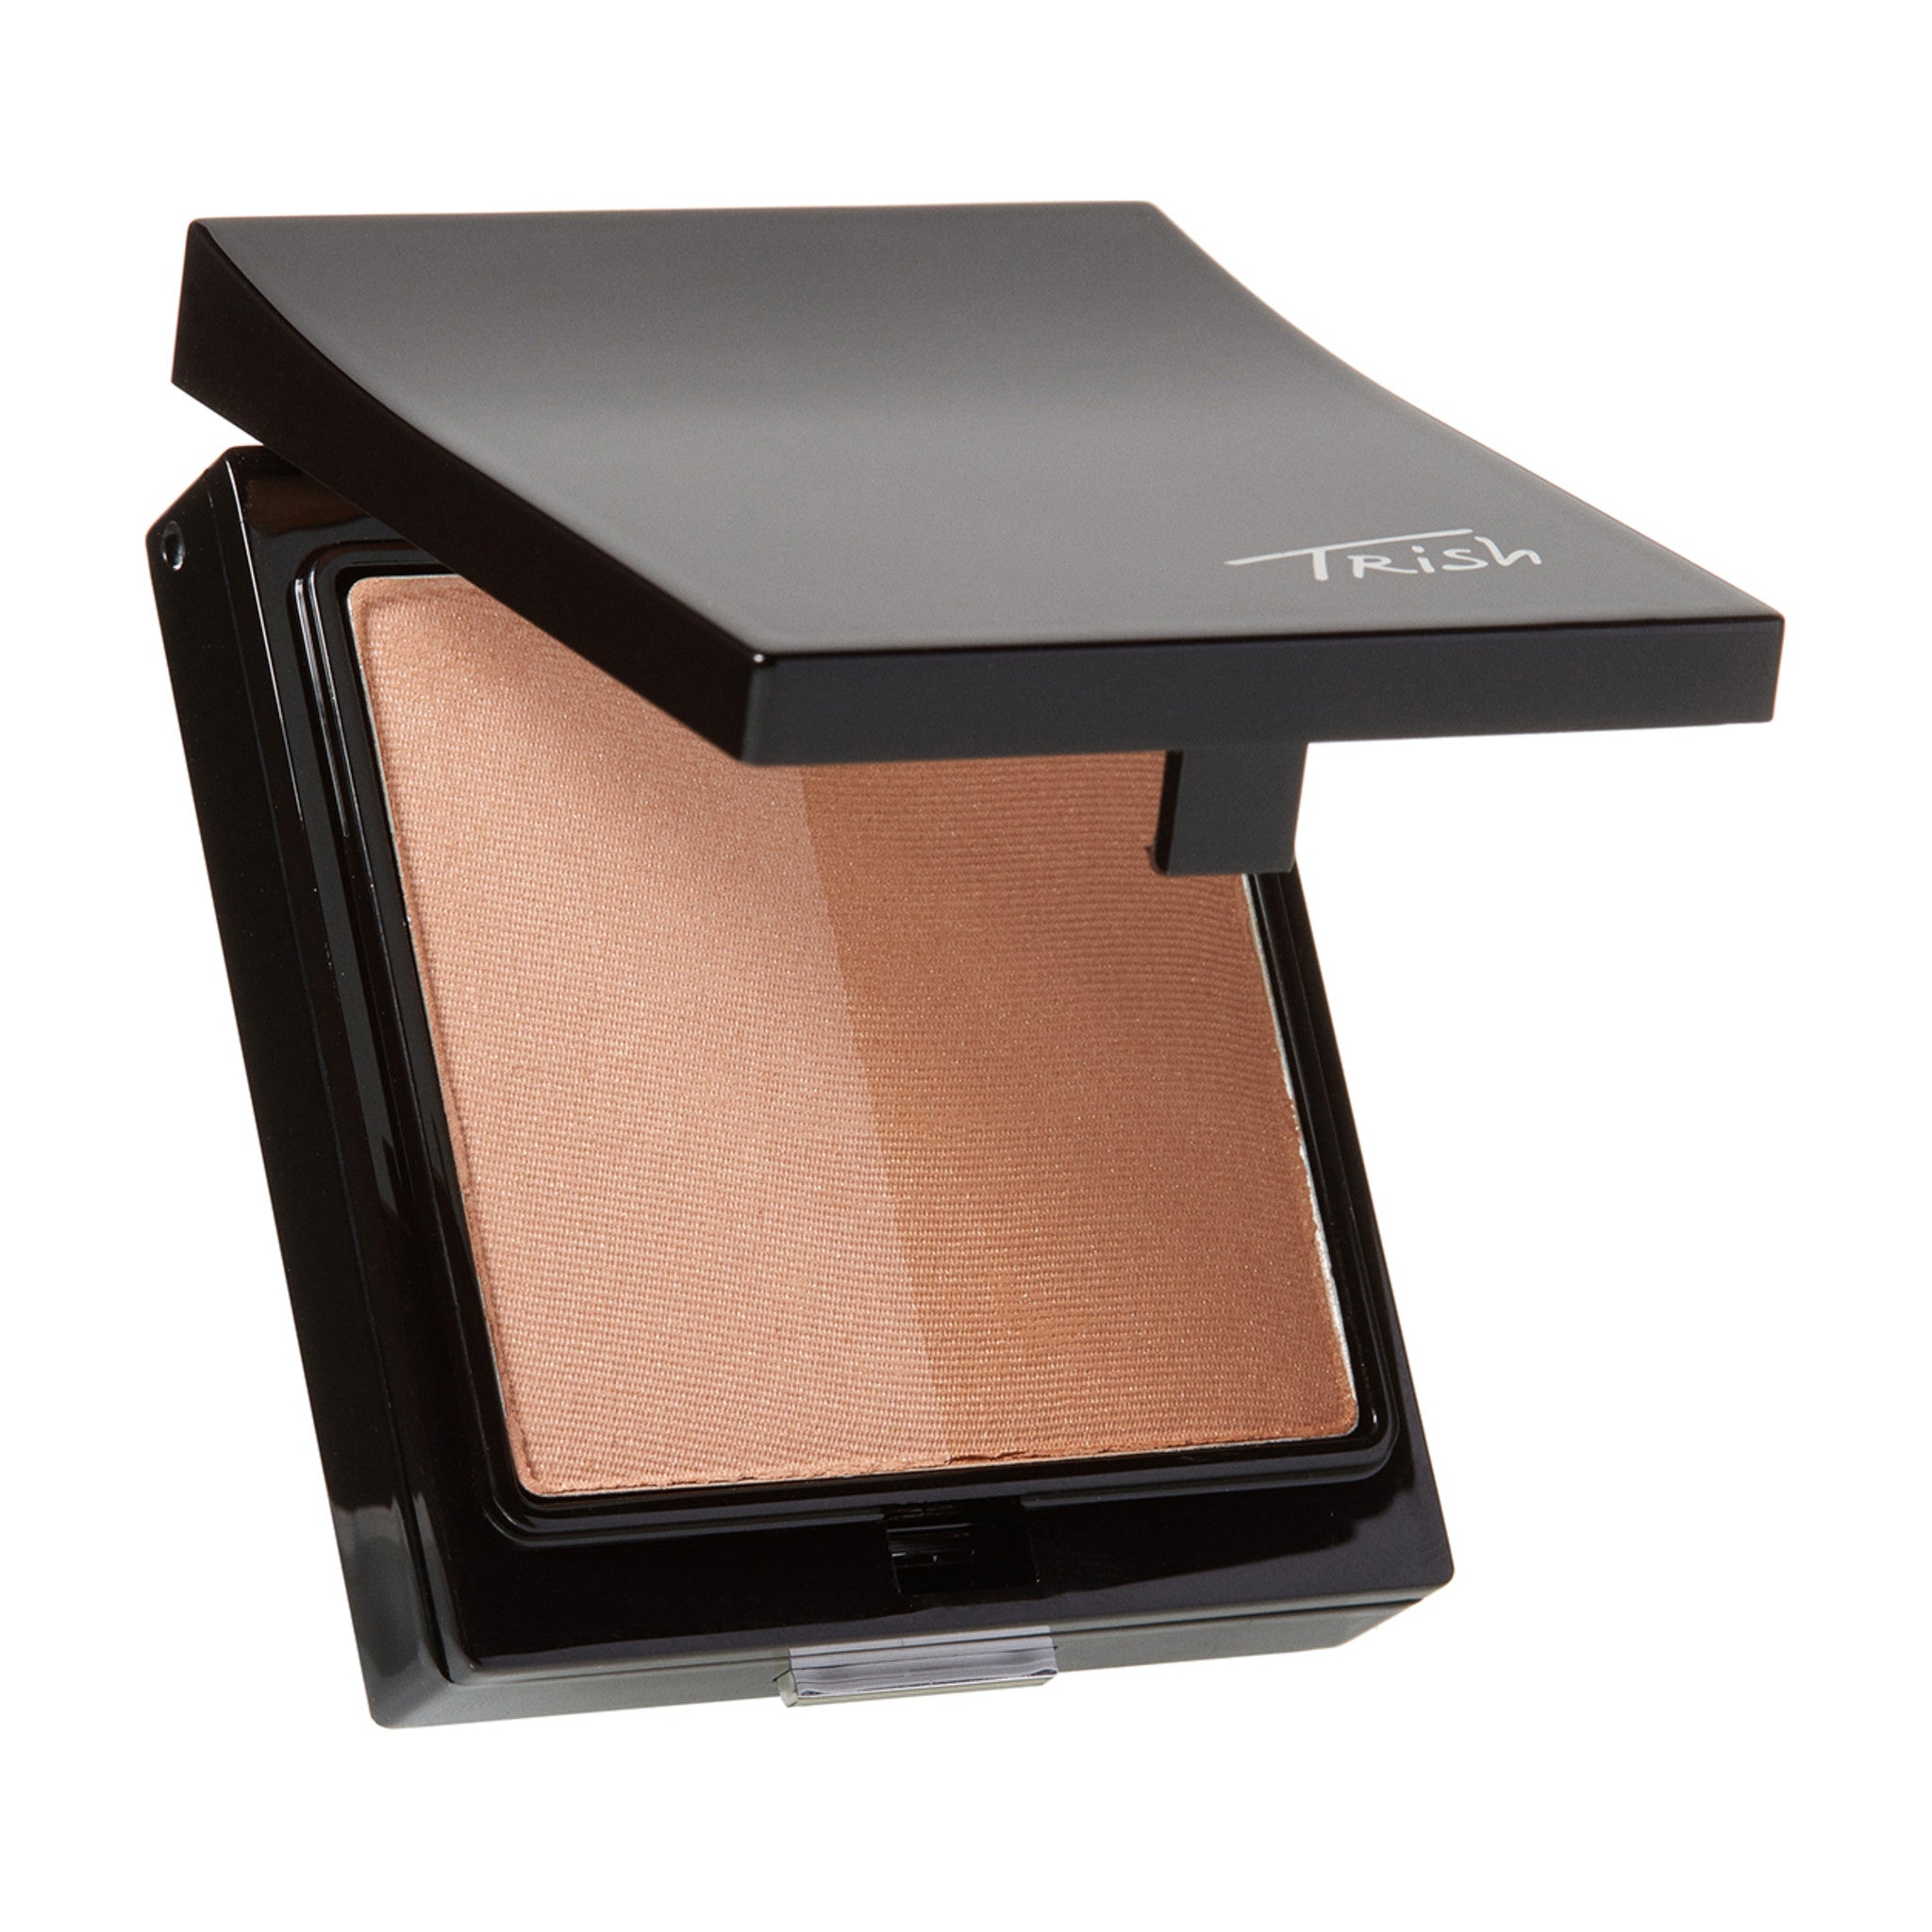 Trish McEvoy Dual Resort Bronzer main image. This product is in the color bronze